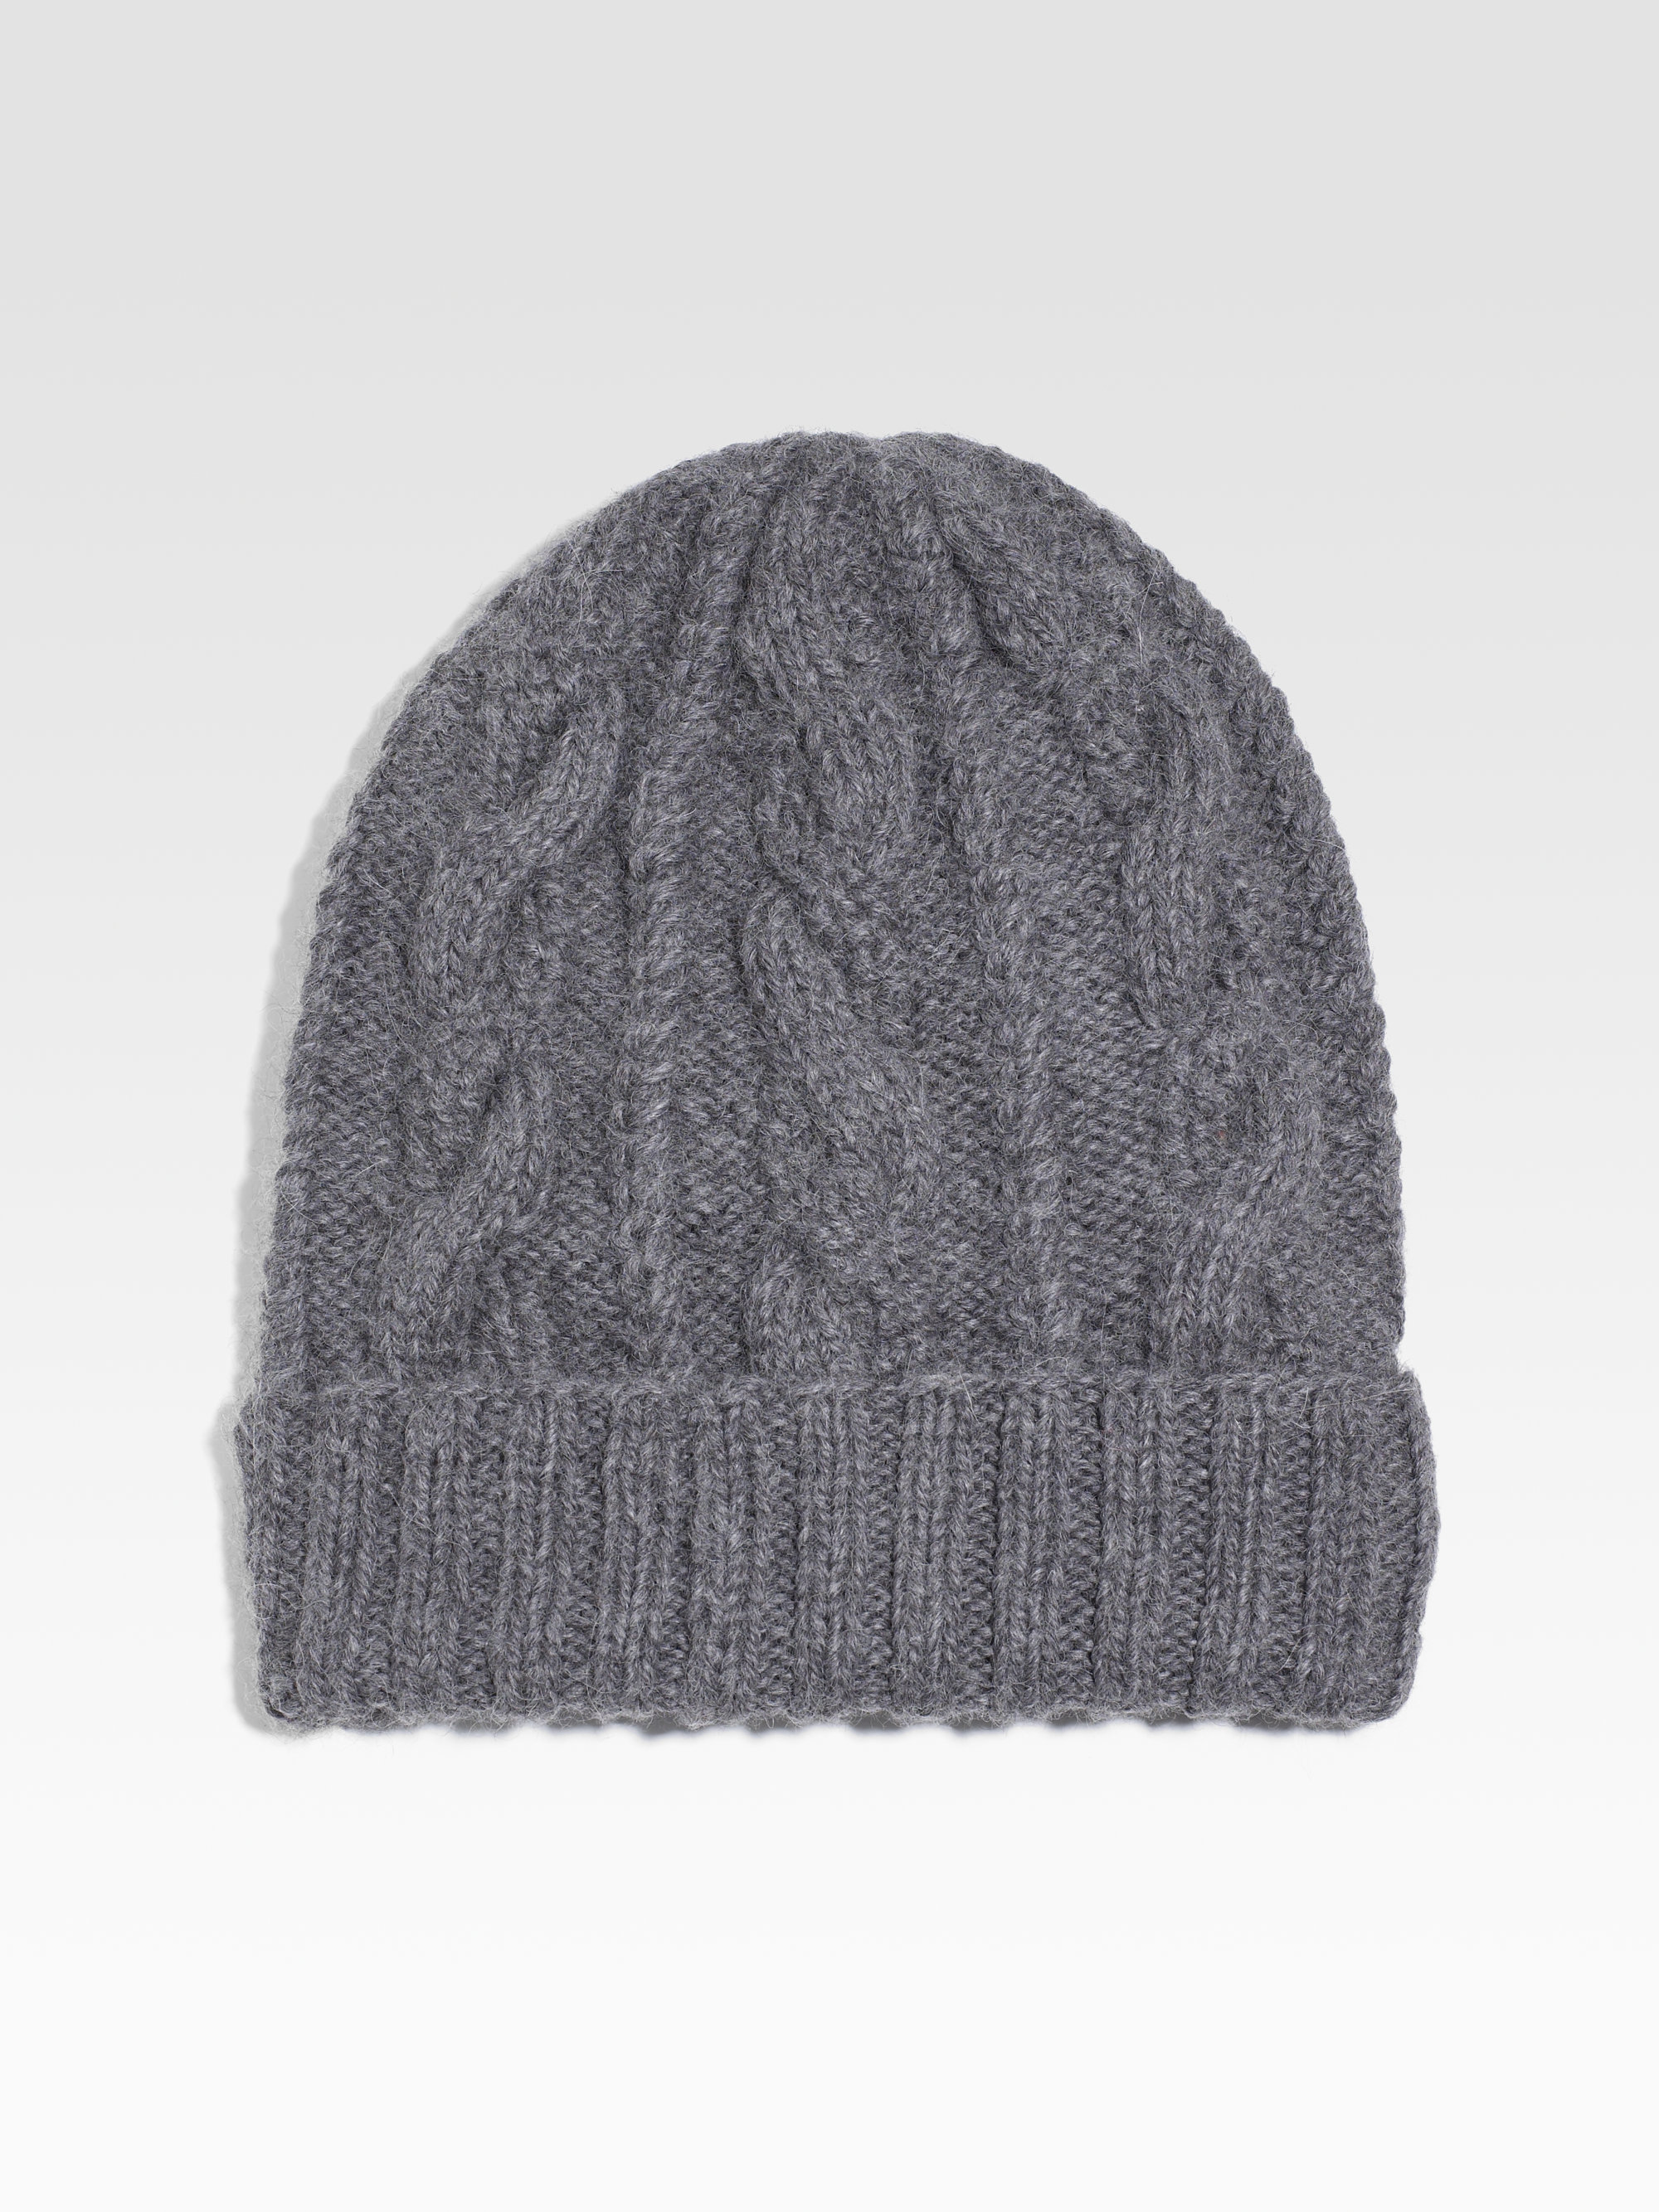 Lyst - Mr. Kim By Eugenia Kim Slouchy Hand knit Beanie in Gray for Men